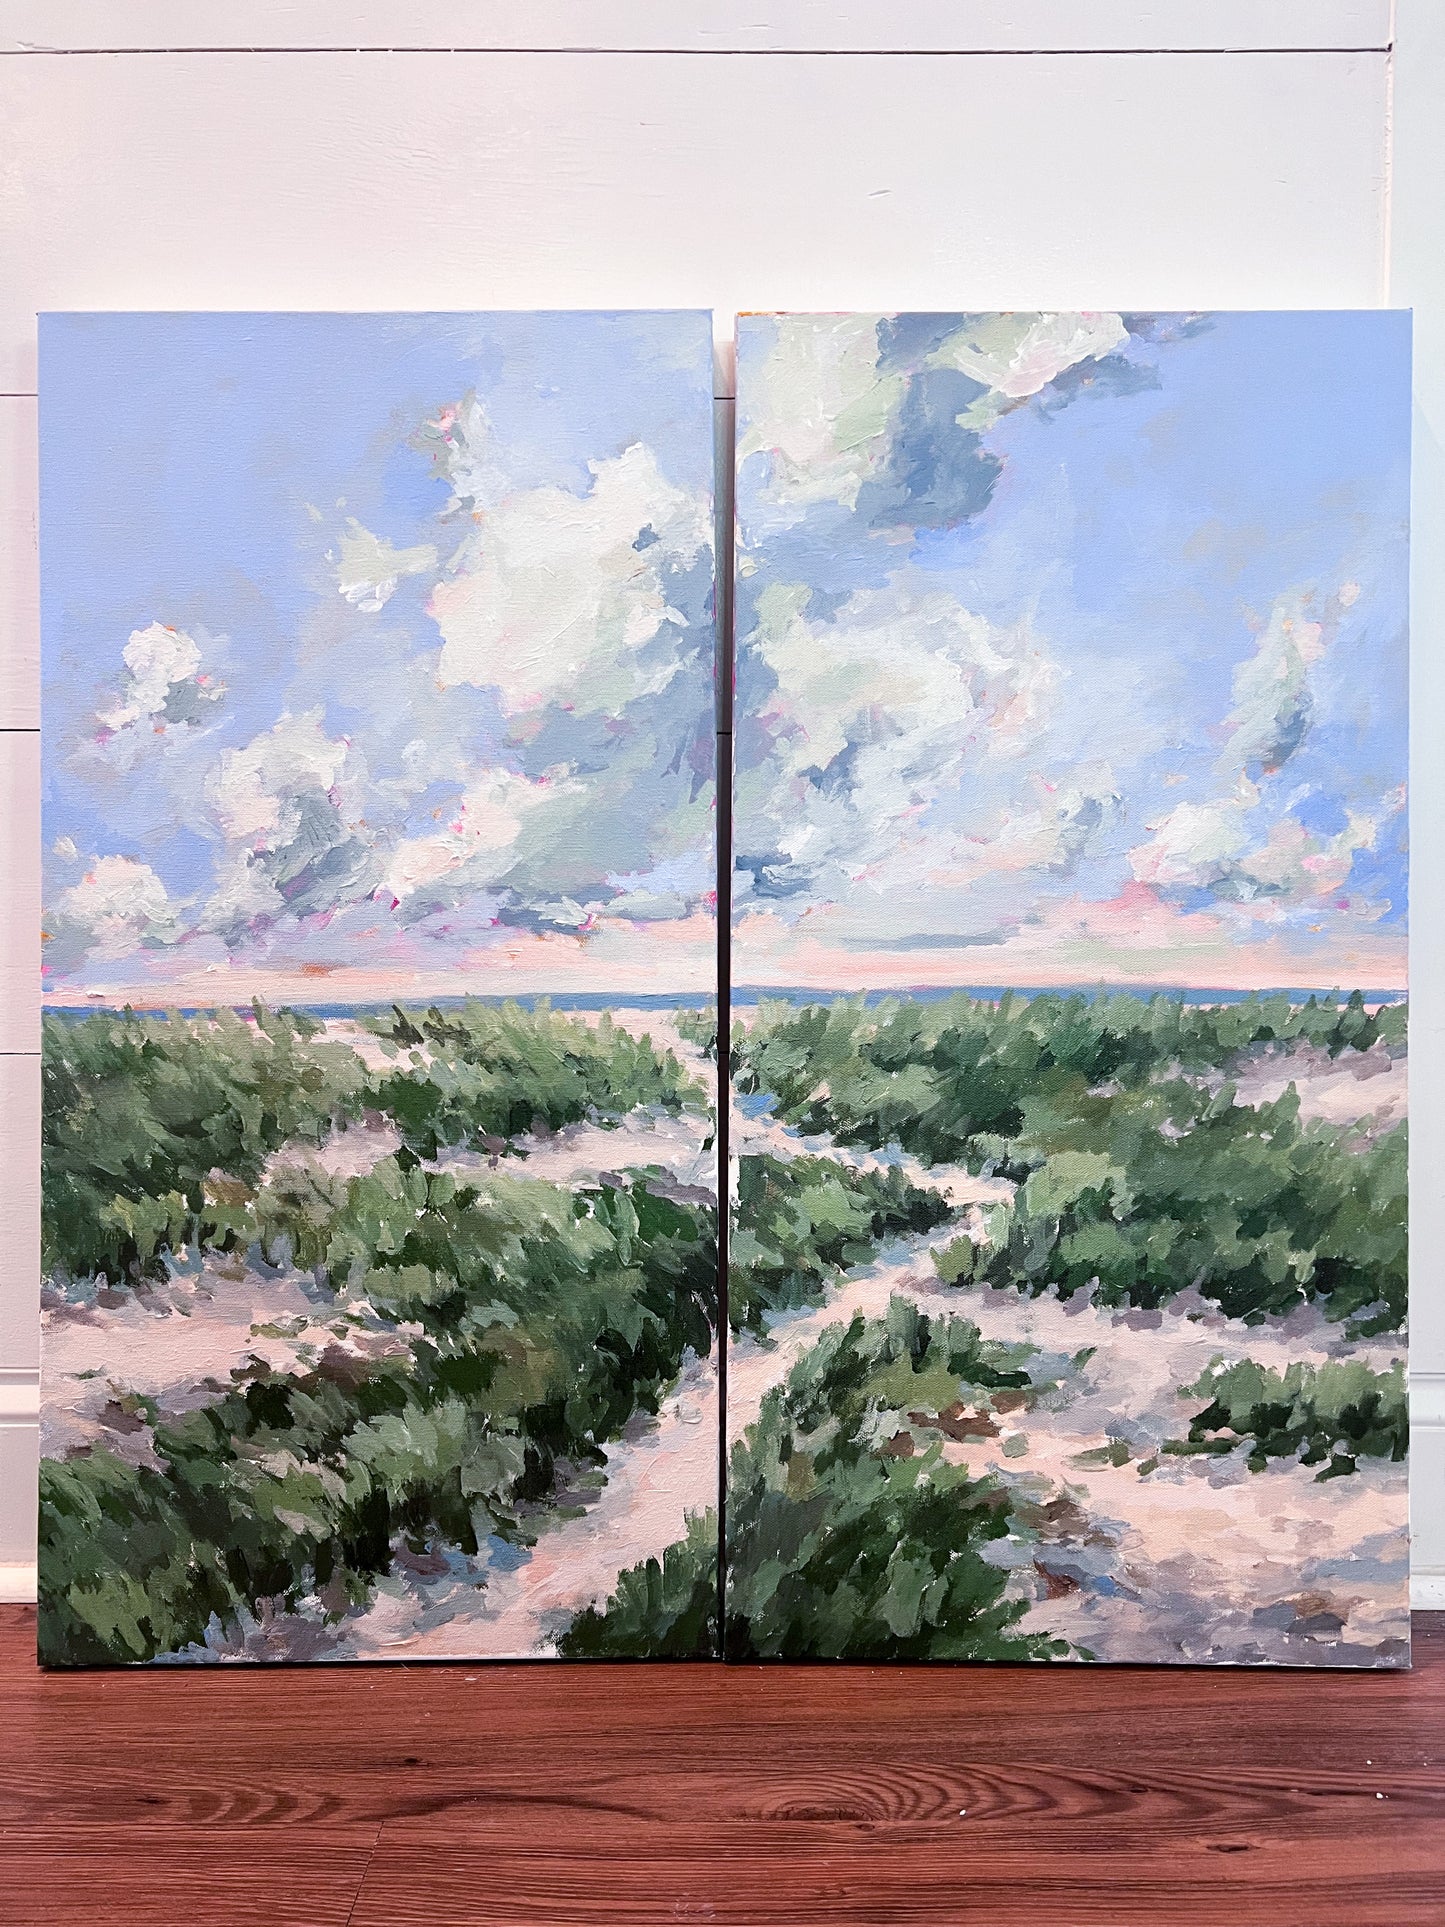 Pathway to Healing (Diptych)